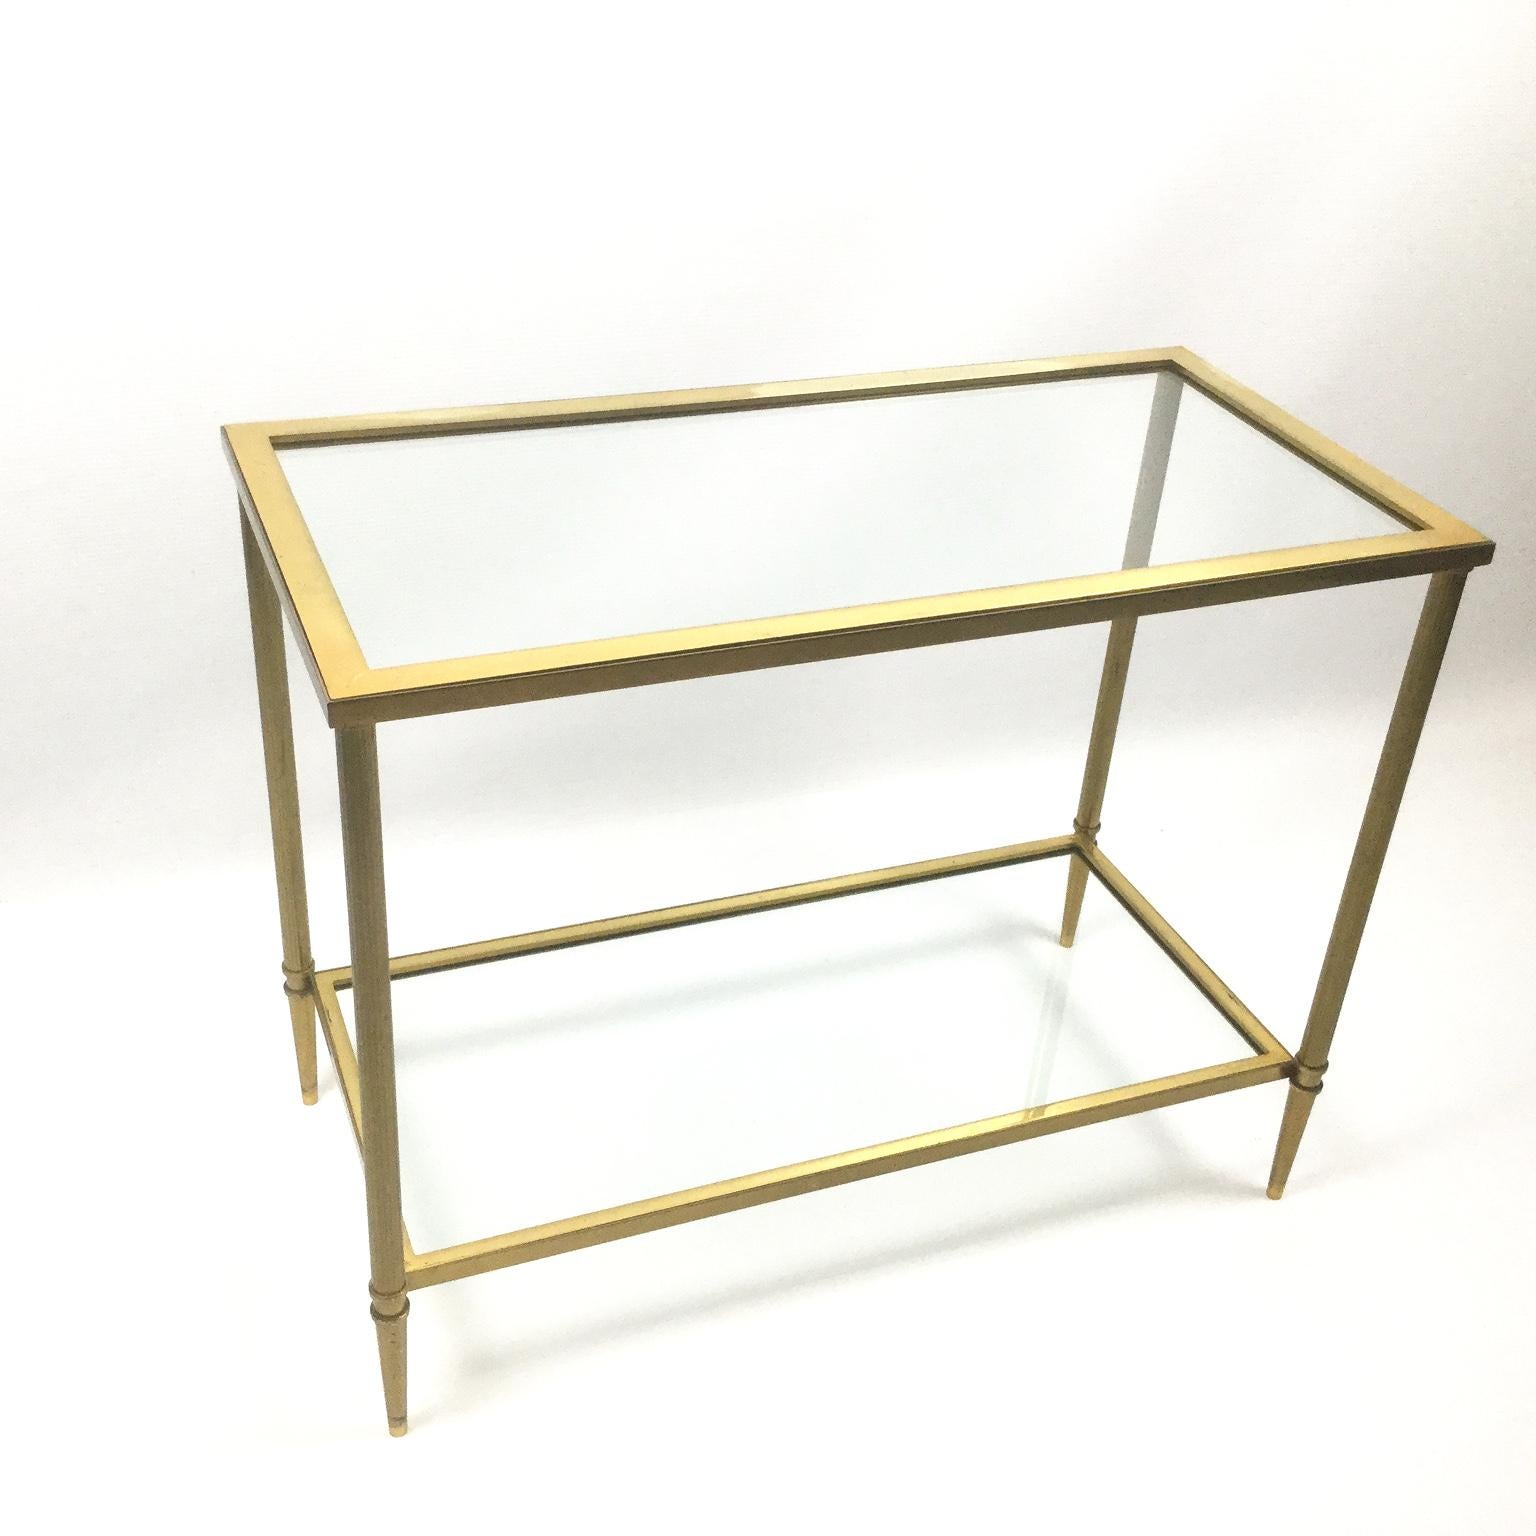 Pair of Brass Console Tables Attributed to Maison Jansen, France, 1970s (Neoklassisch)